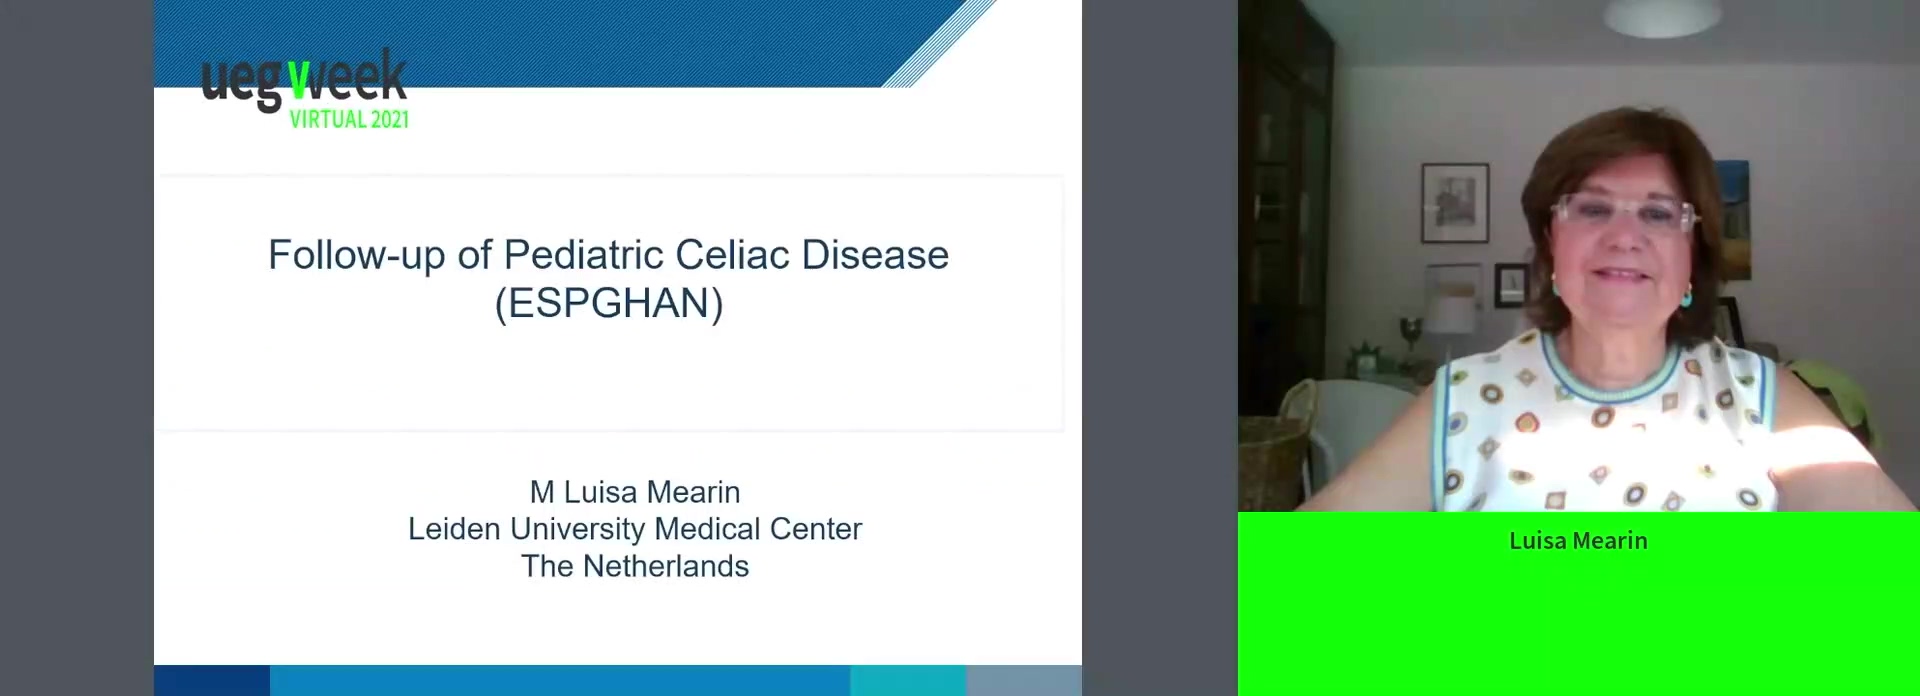 Management of follow-up of pediatric CeD (ESPGHAN)